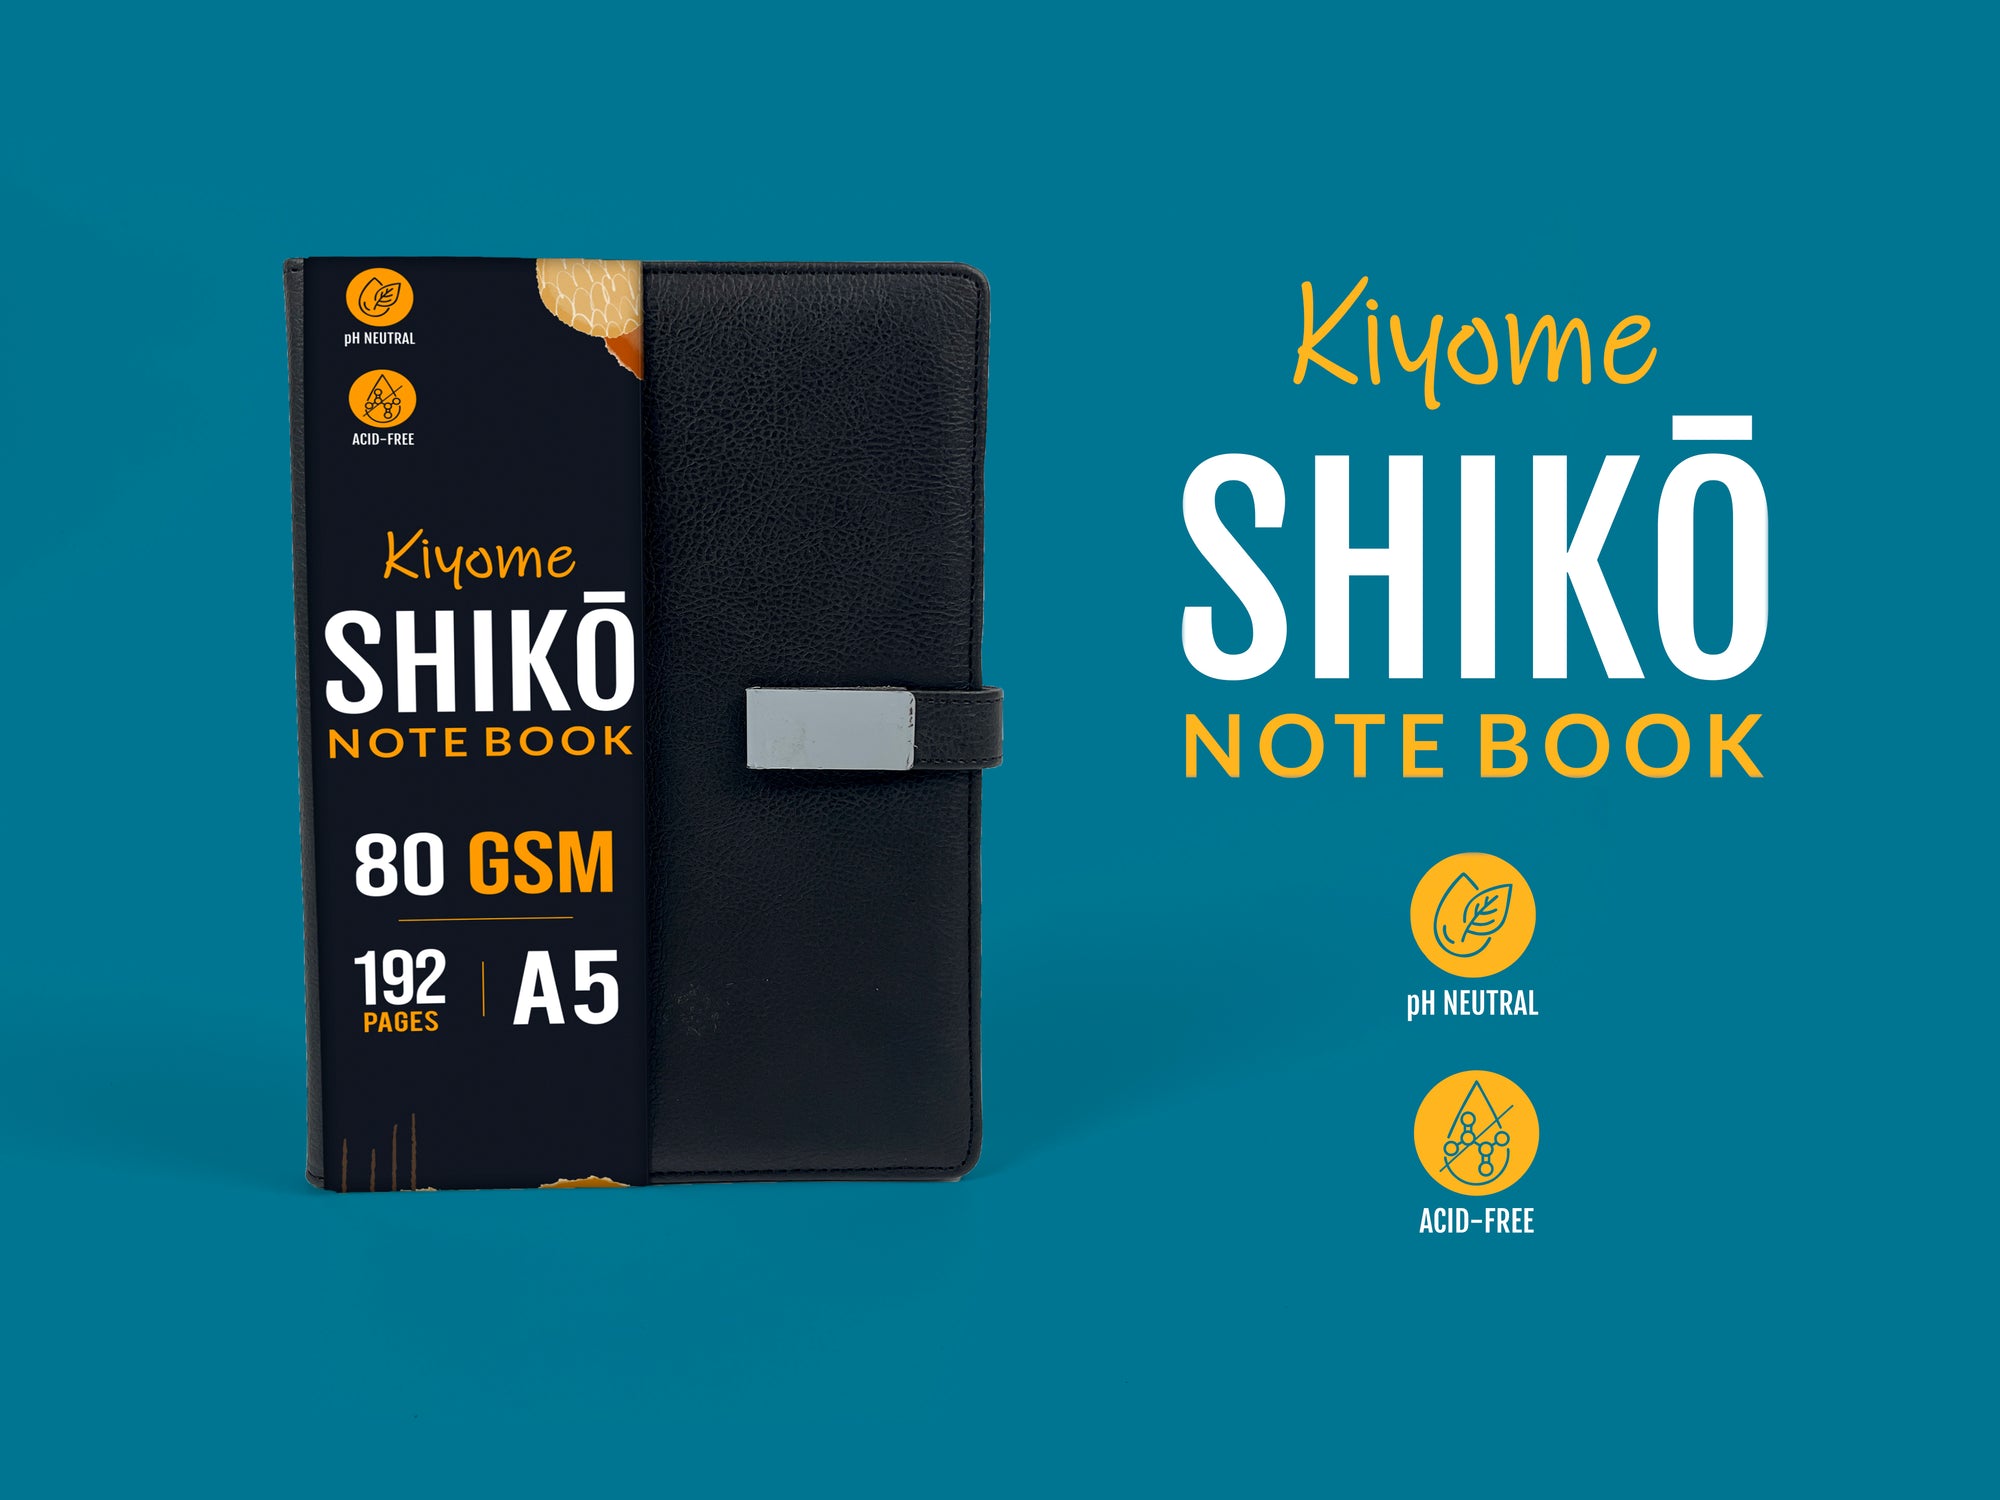 Kiyome SHIKO Notebook | Leather Textured Cover | 80 GSM | A5 | 192 Ruled Pages